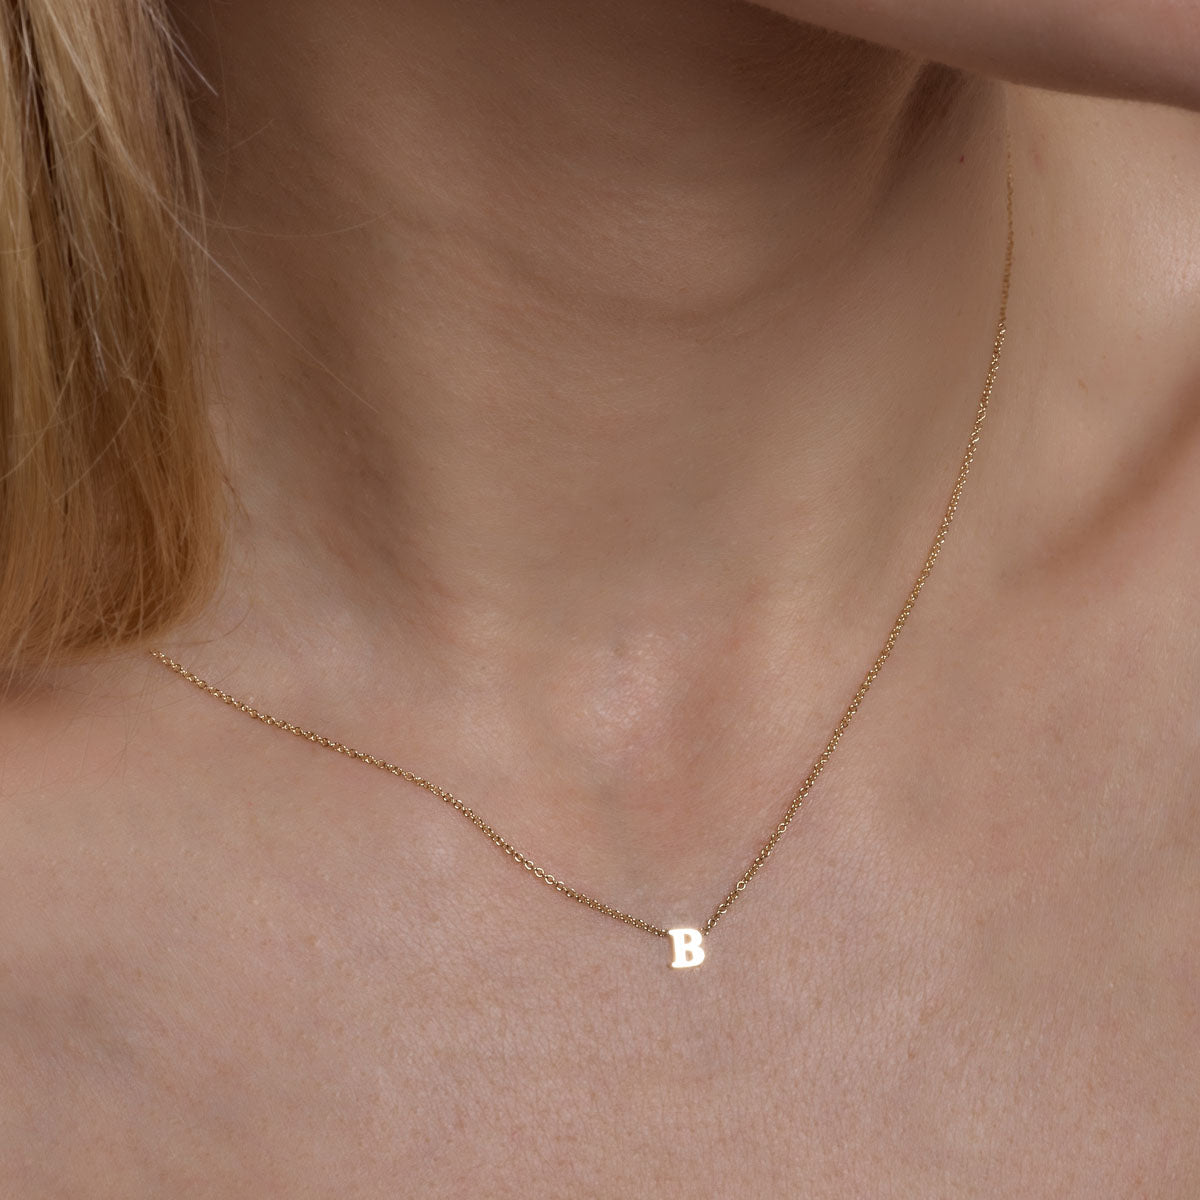 Gold initial necklace on woman, showcasing style and personalized charm.